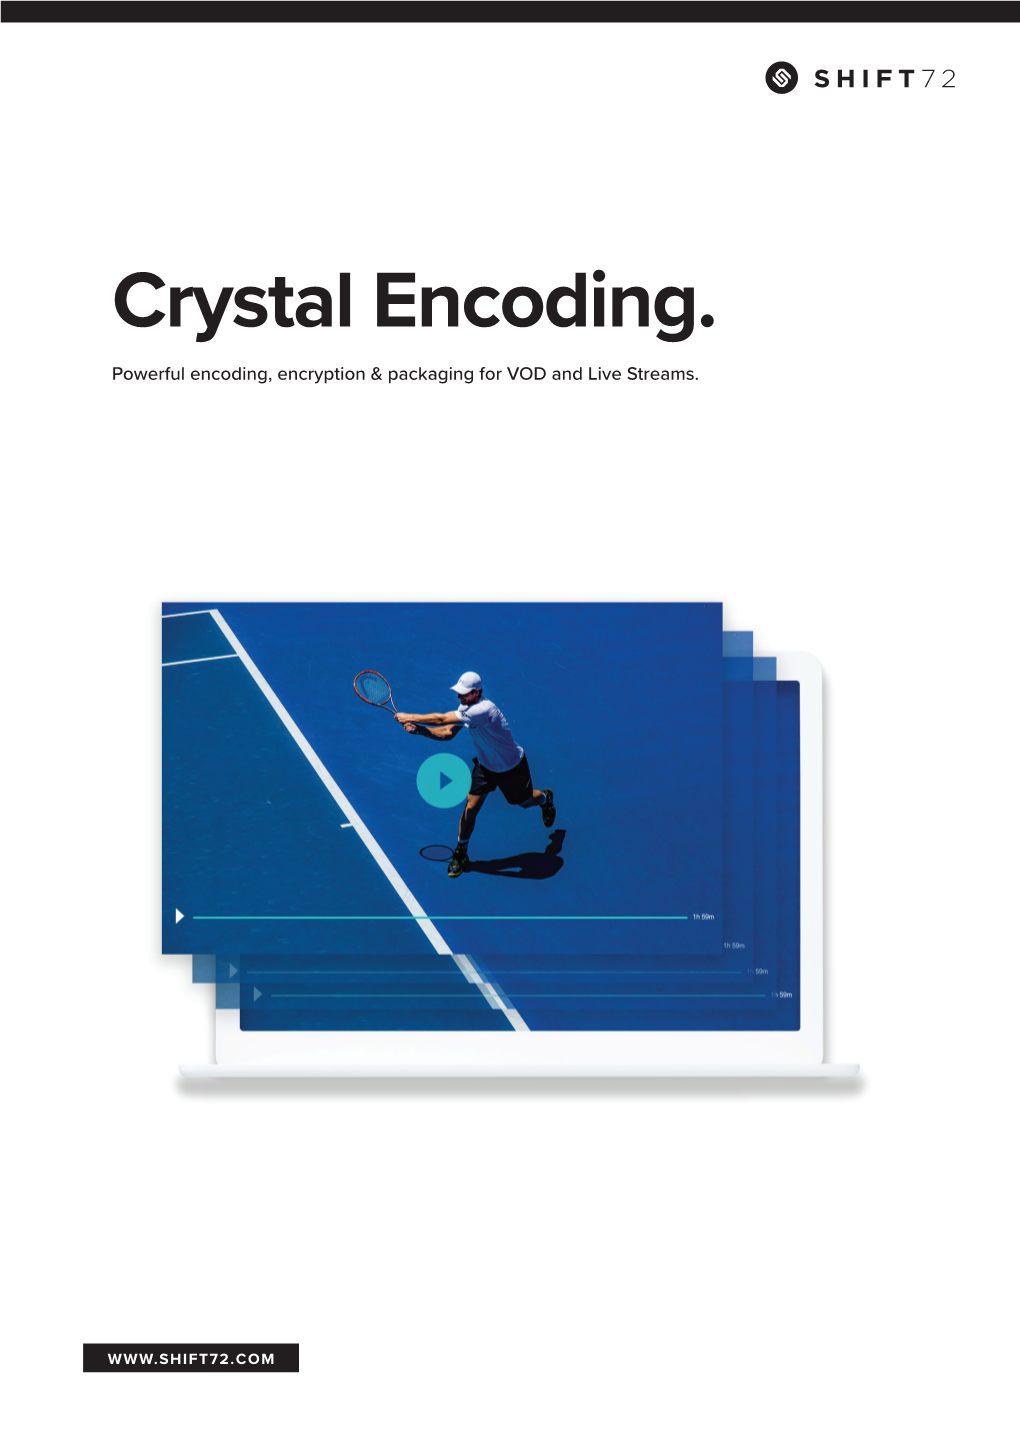 Crystal Encoding. Powerful Encoding, Encryption & Packaging for VOD and Live Streams